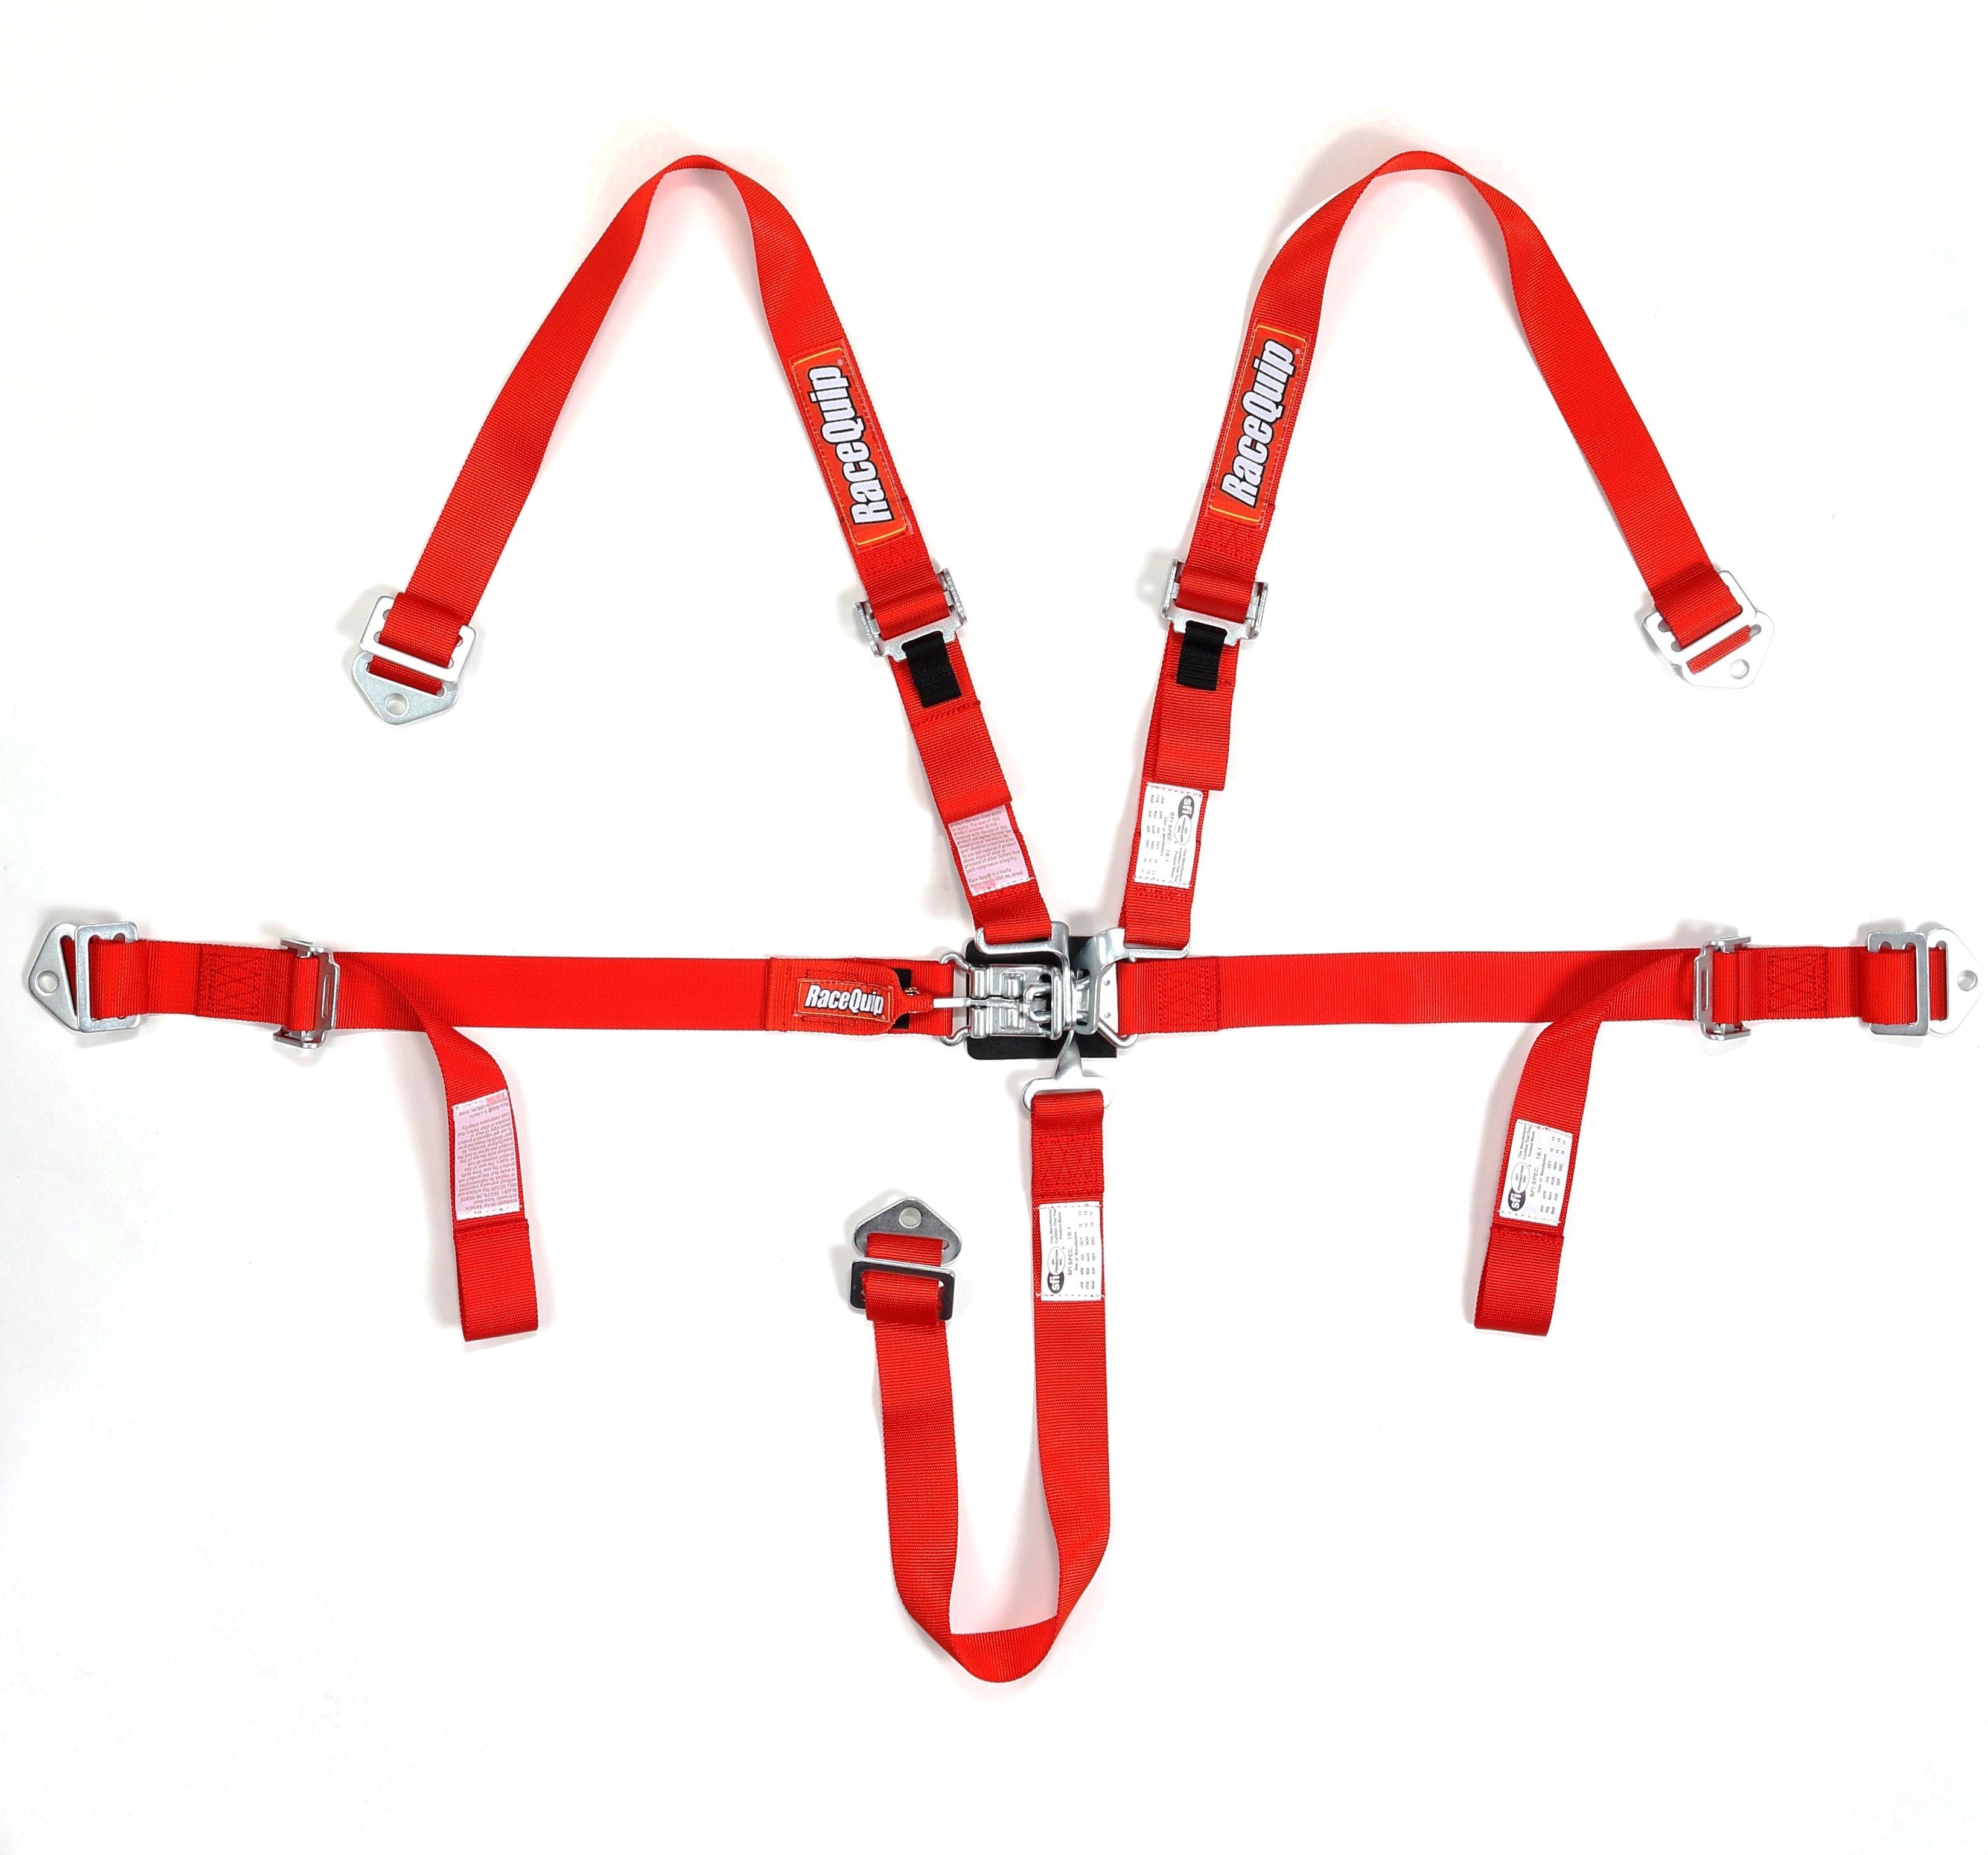 RaceQuip 709019 SFI 16.2 JR Dragster and Quarter Midget 5-Point Youth Racing Harness Set (Red)